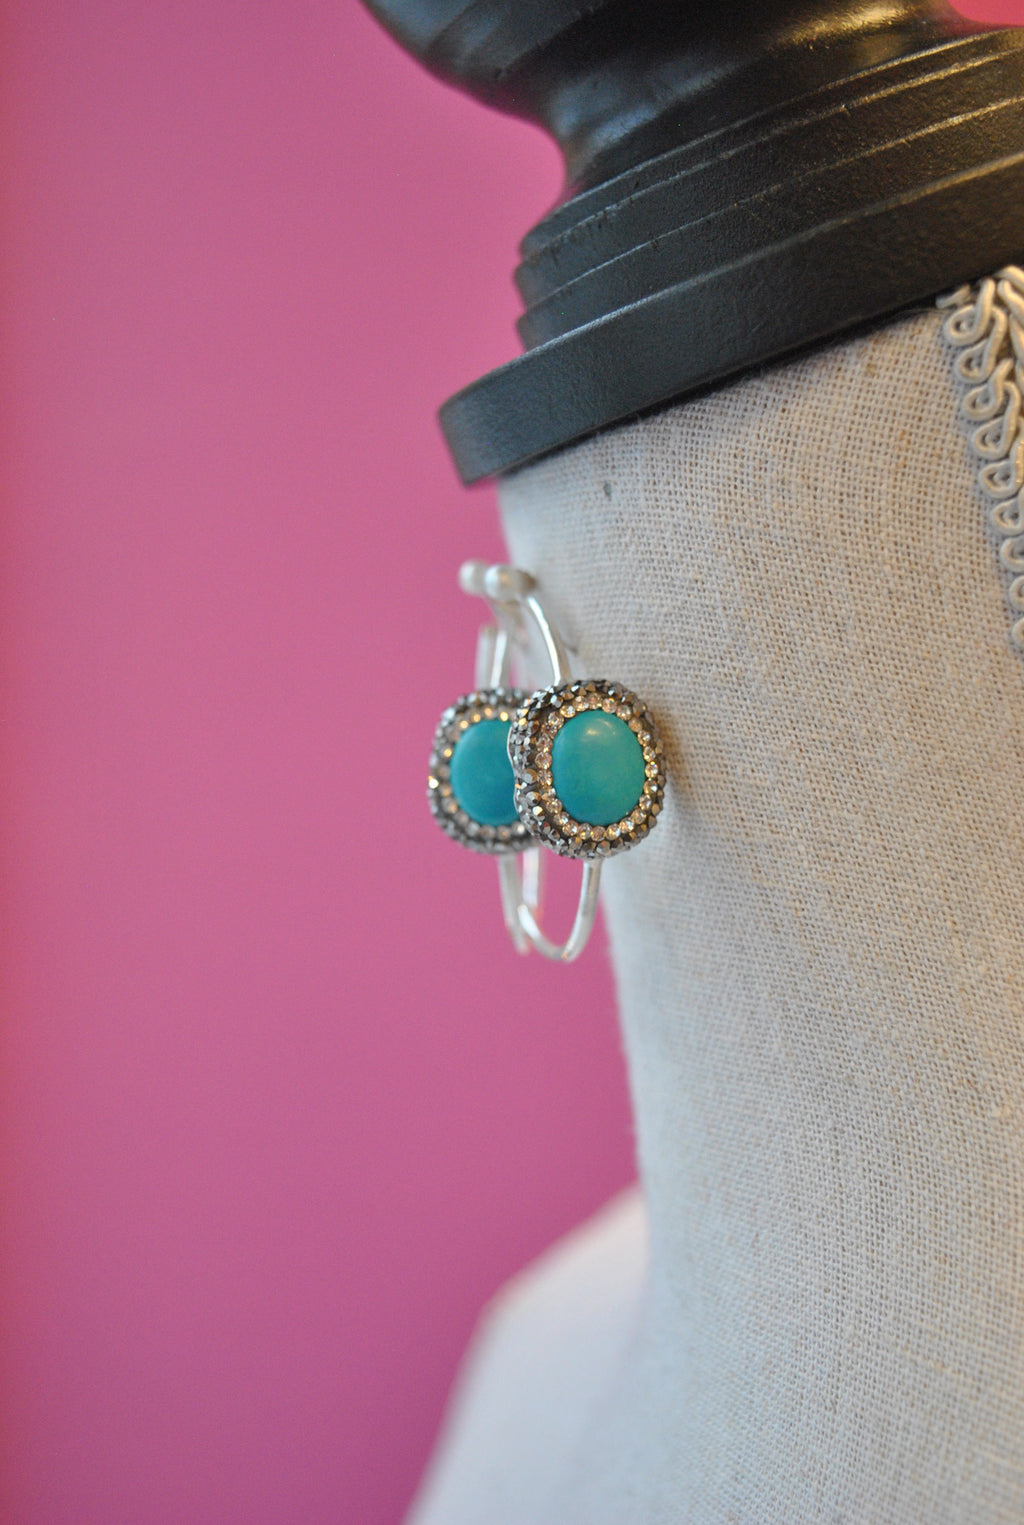 HOOP COLLECTION - TURQUOISE AND SWAROVSKI CRYSTALS ON STERLING SILVER